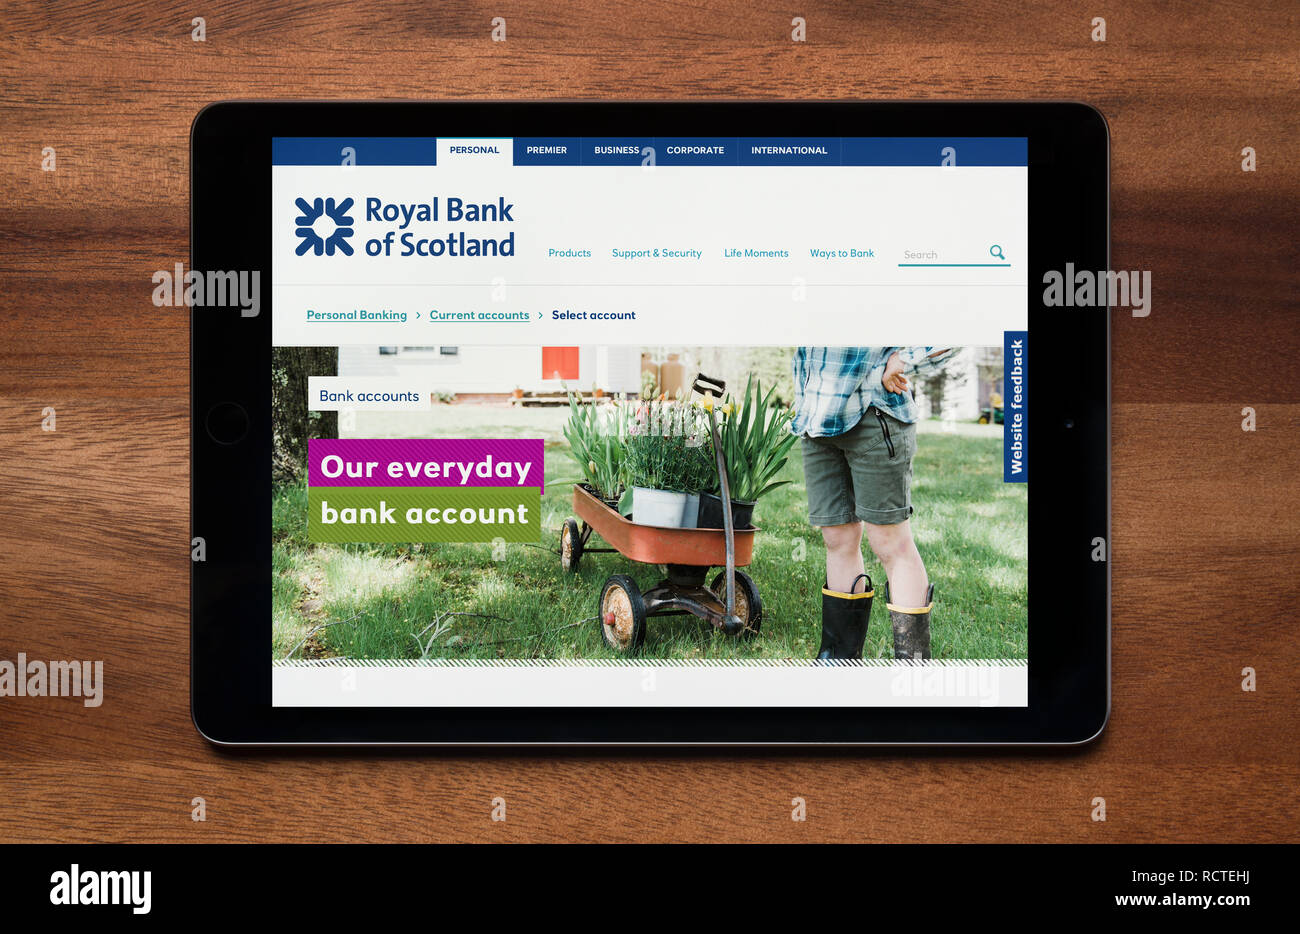 The website of Royal Bank of Scotland (RBS) is seen on an iPad tablet, which is resting on a wooden table (Editorial use only). Stock Photo